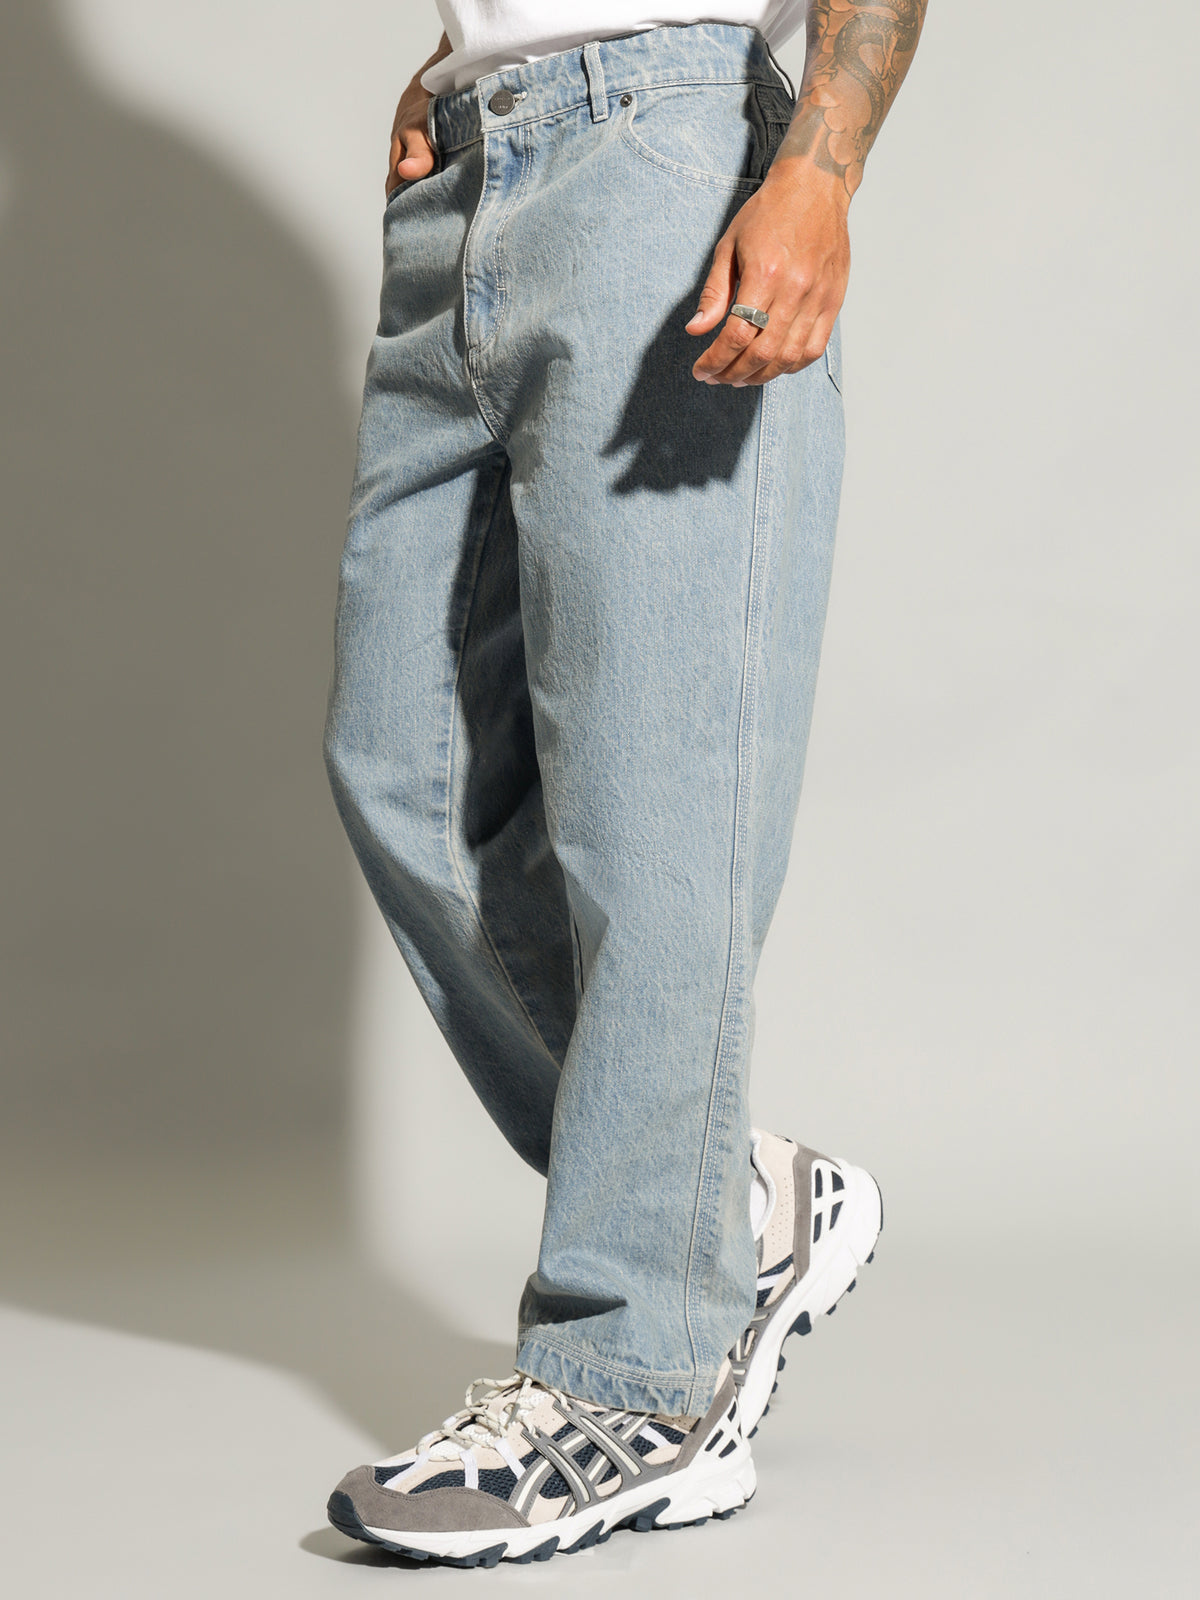 Chaos Straight Jeans in Arctic Blue